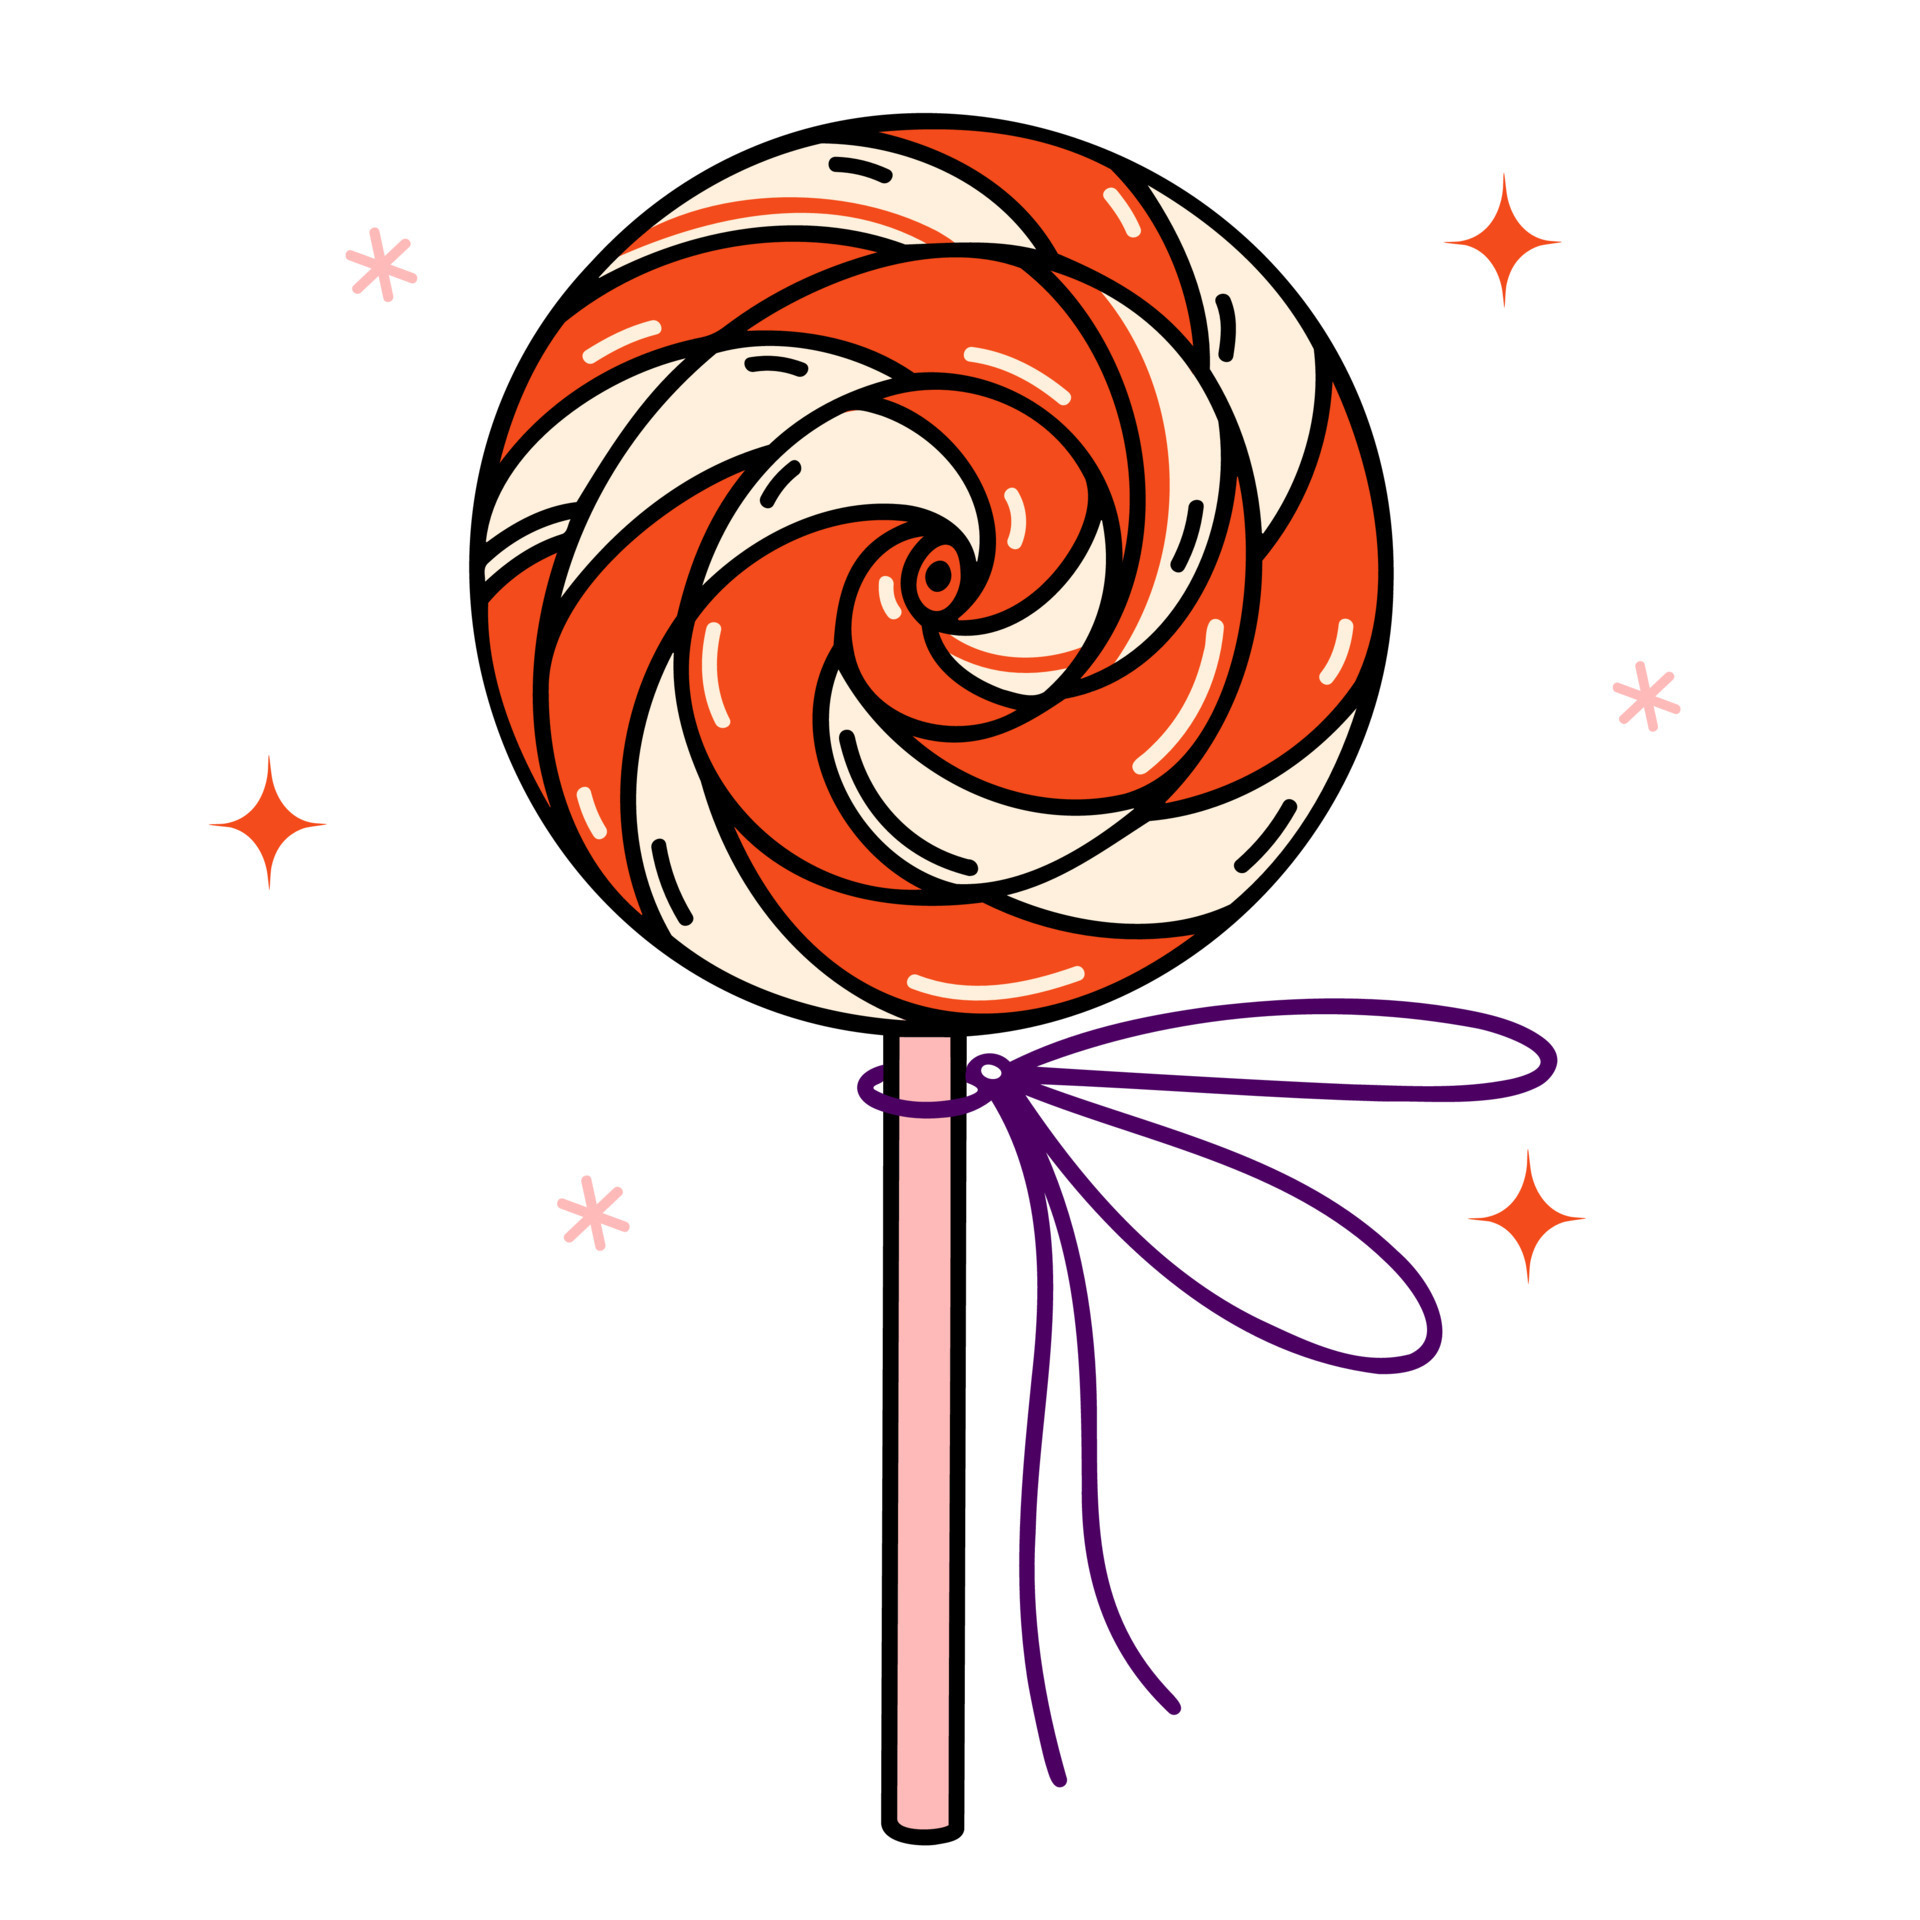 Lollipop vector icon. Sweet striped candy on a stick. Big round caramel  decorated with ribbon, isolated on white. Tasty dessert made from sugar,  fruits. Flat cartoon clipart for print, logo, web 11409949